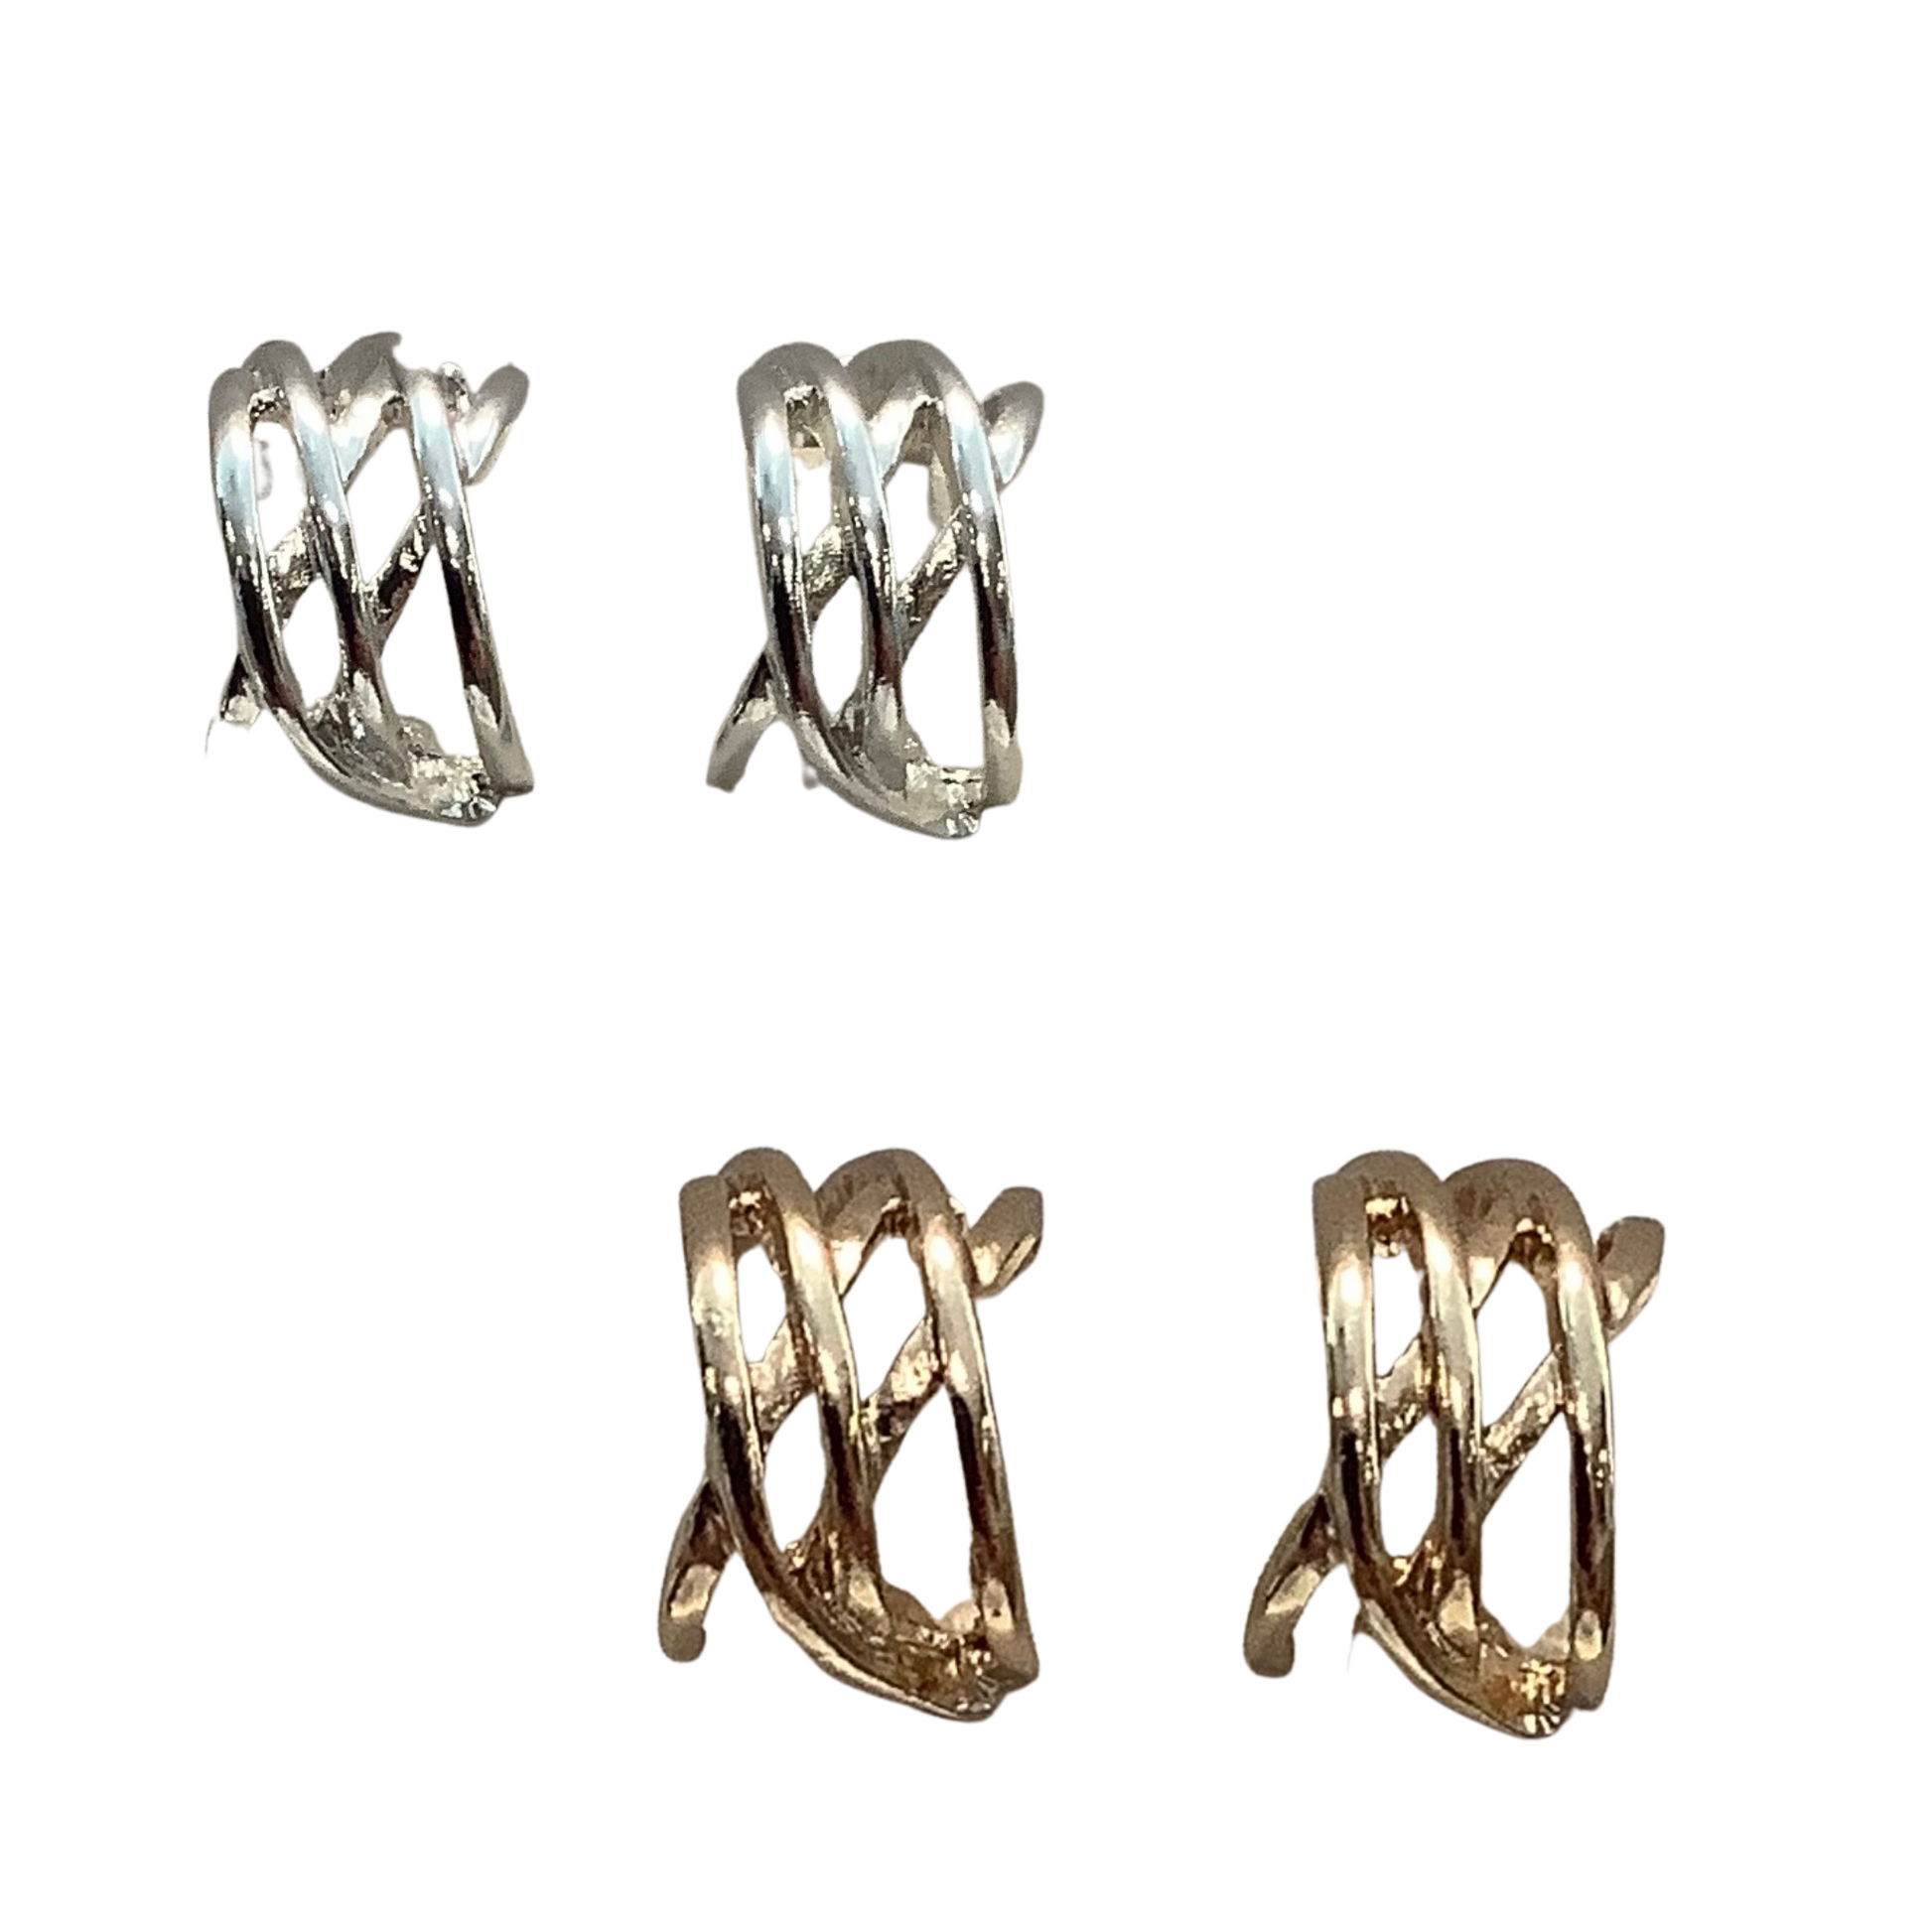 Introducing the Woven Clip-On Hoops, available in silver and gold. Perfect for everyday use, these small hoops offer a subtle touch of sophistication. Crafted from quality materials, they are lightweight and easy to take on and off. Add style to your outfit in a flash with Woven Clip-On Hoops.